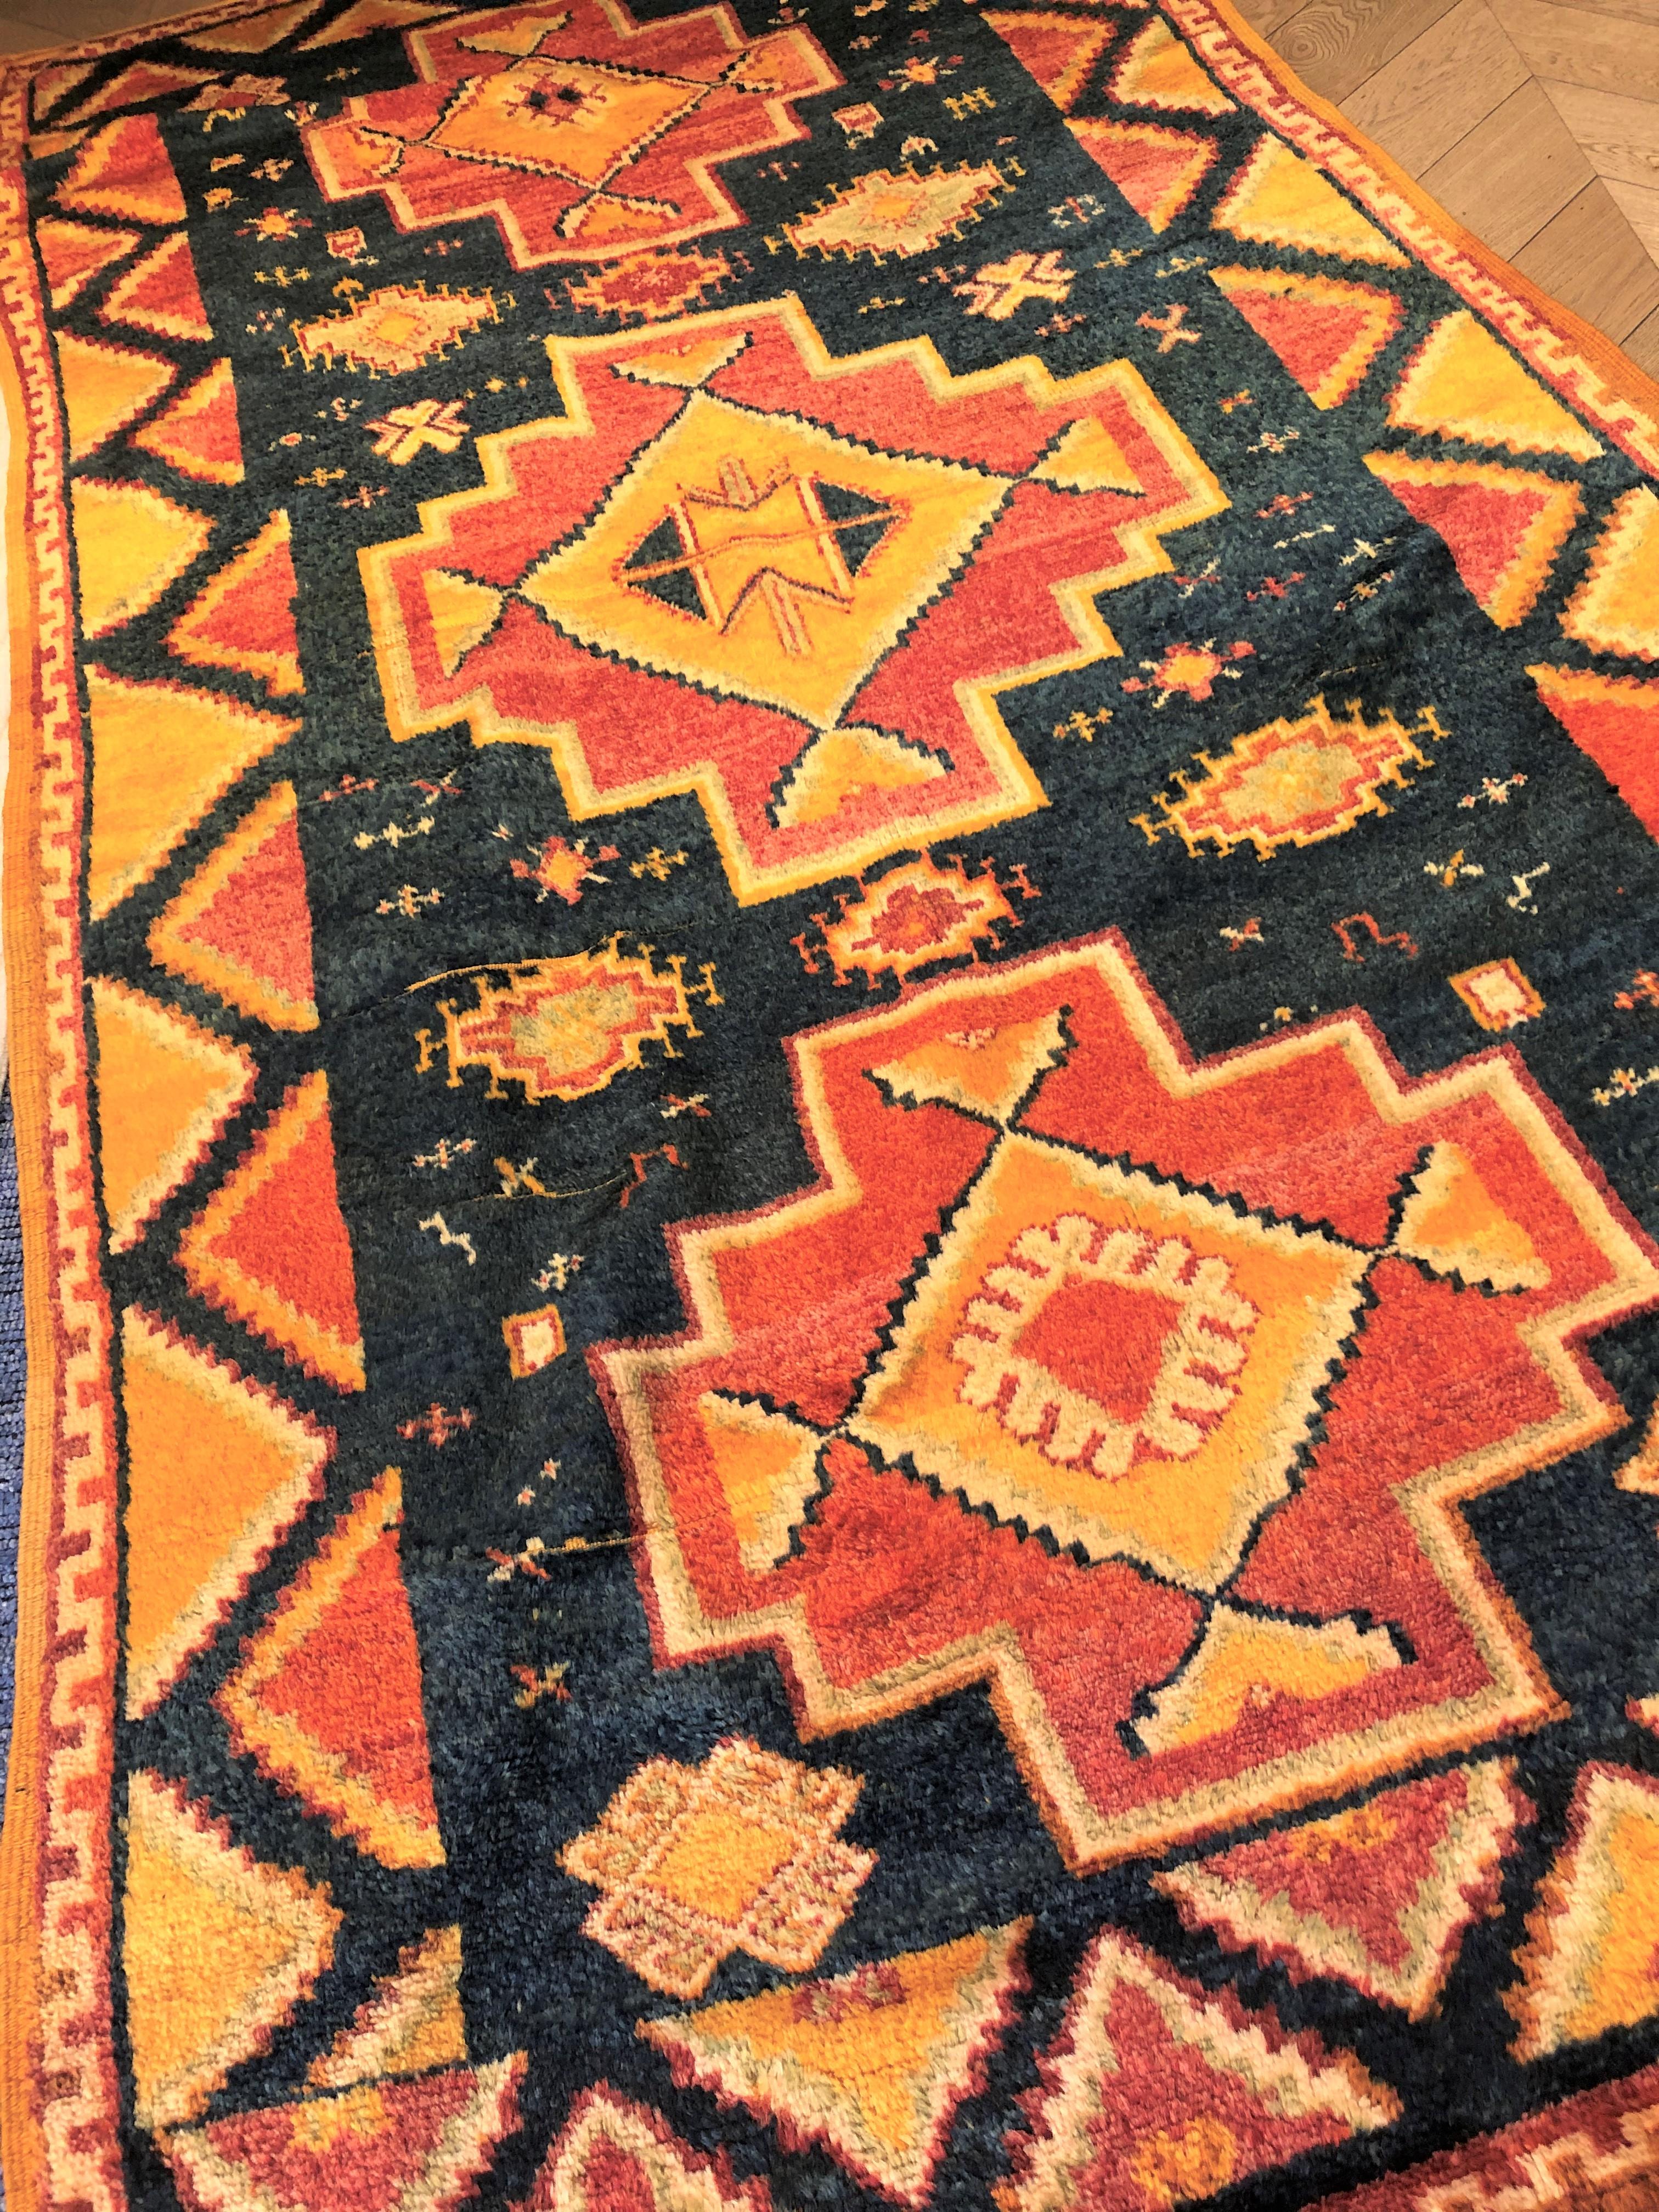 Berber carpet, old manufacture, oouazouite quality, characterized by a saffron yellow wool frame. These carpets have a decoration that portrays the daily life of the tribe along with classic themes of the Muslim tradition. Three symmetrical polygons